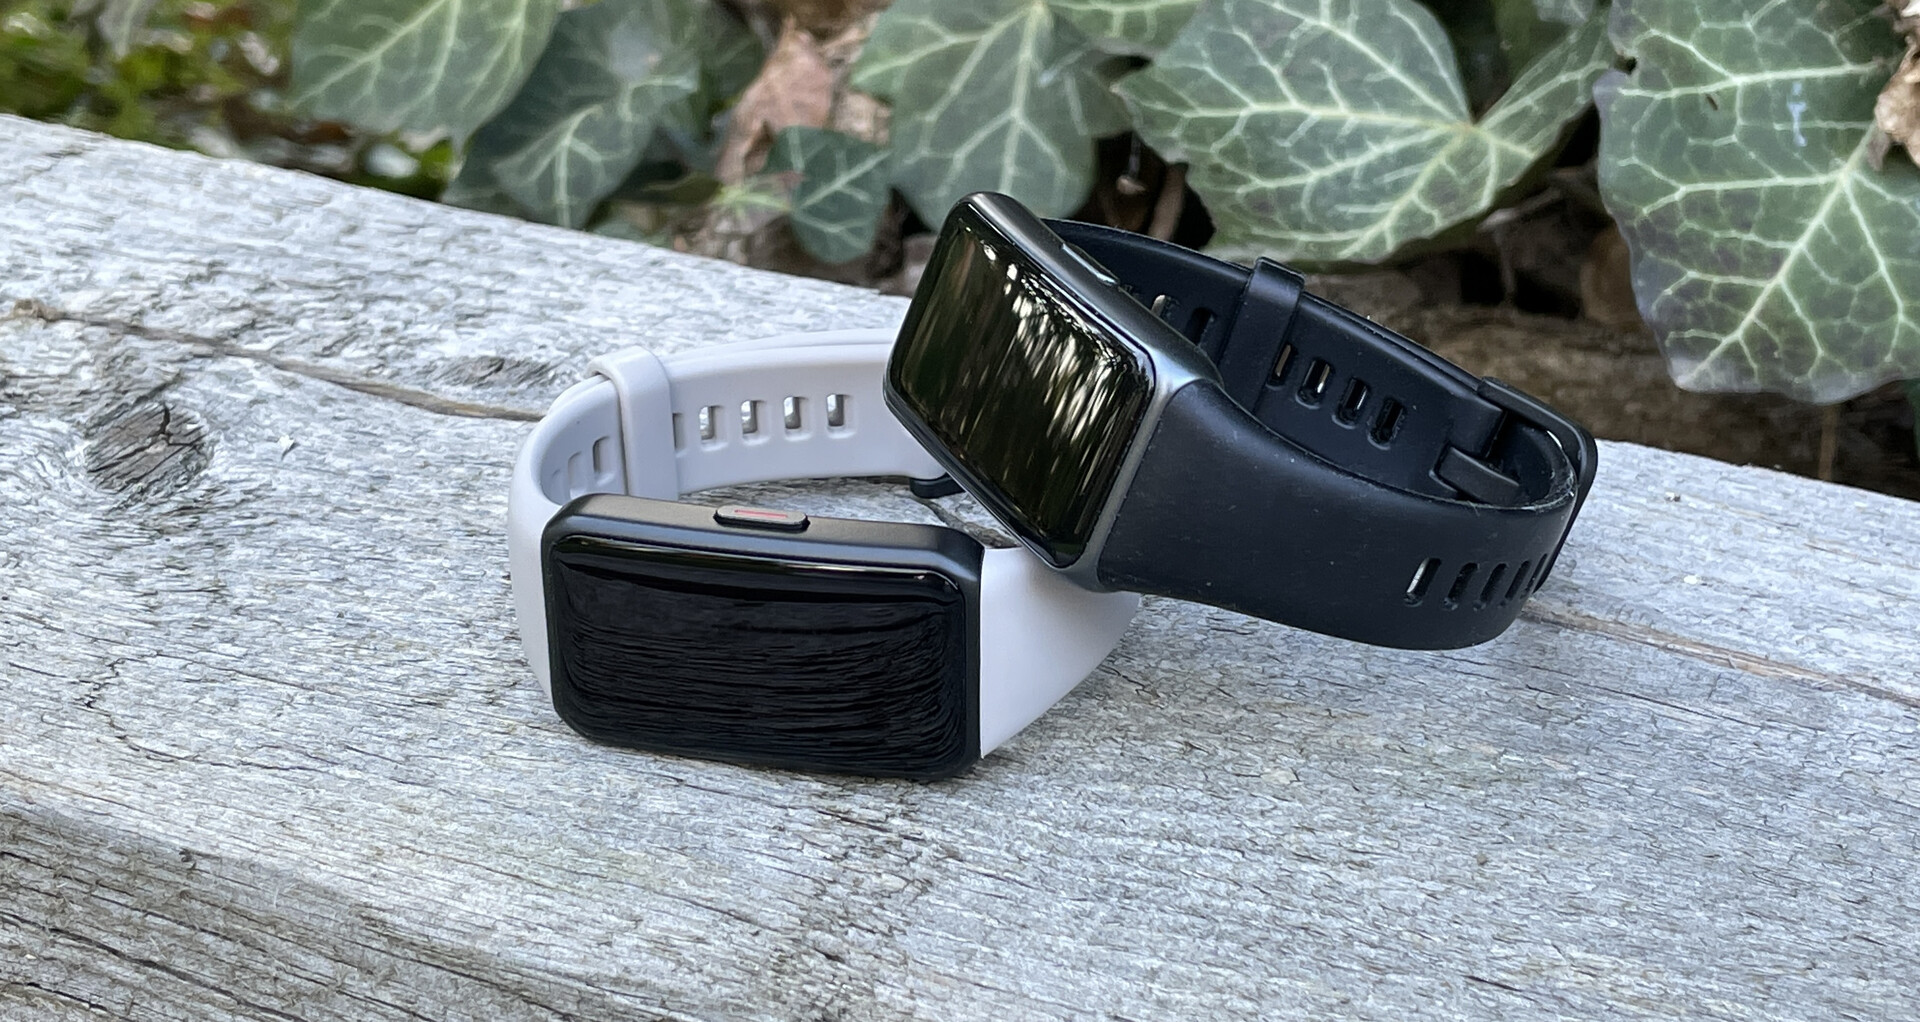 Honor Band 5 vs Huawei Band 8: What is the difference?